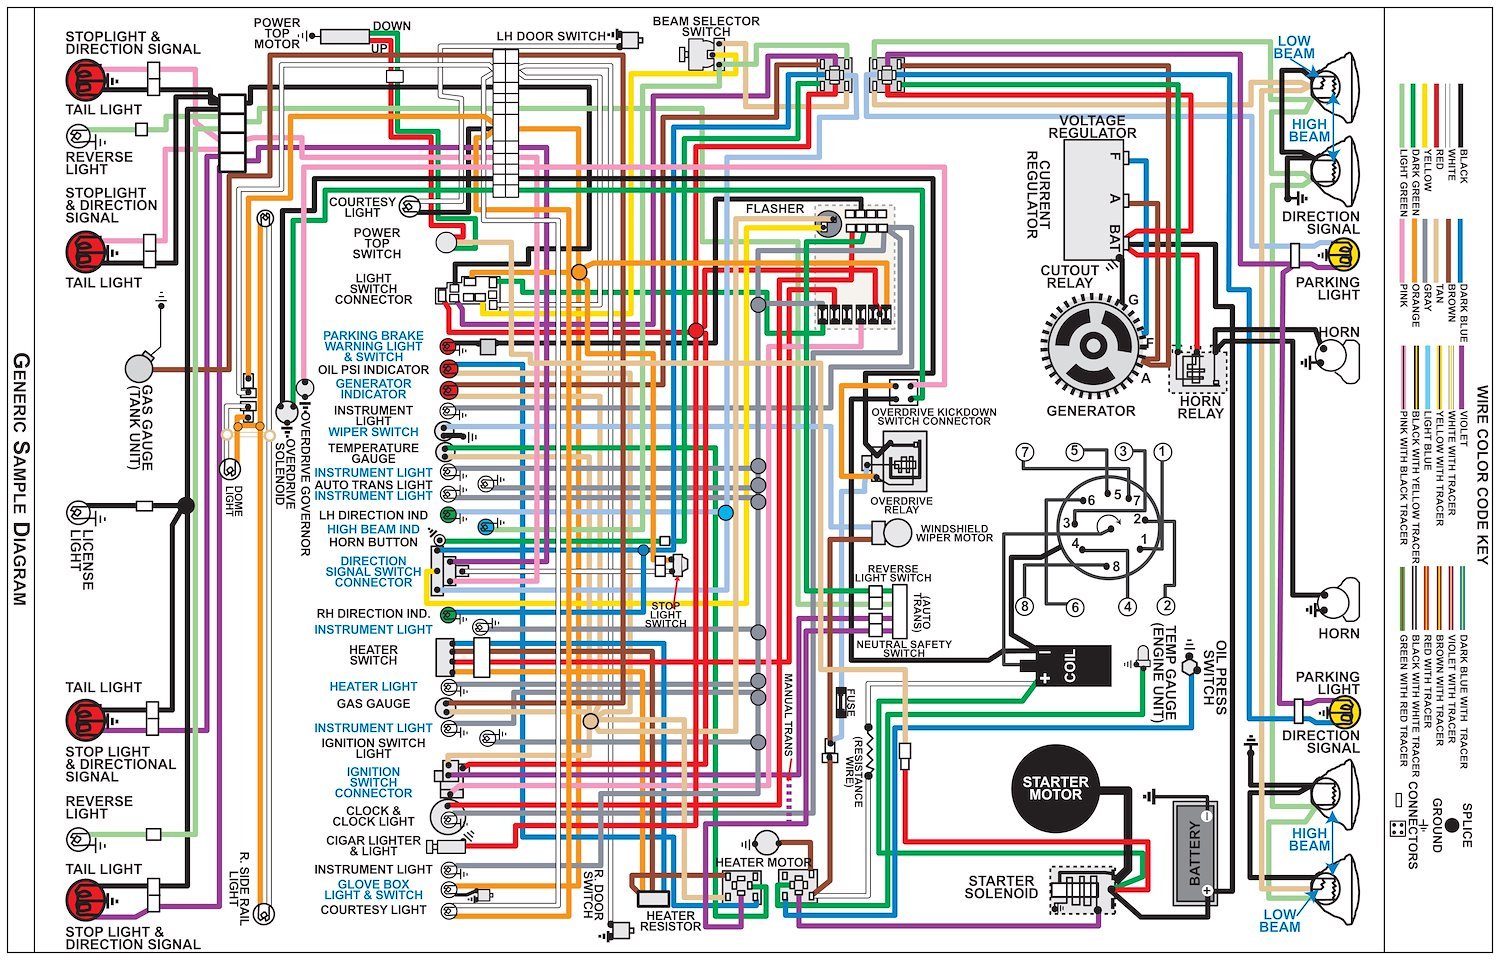 Wiring Diagram for 1955 Ford Car, 11 in x 17 in., Laminated